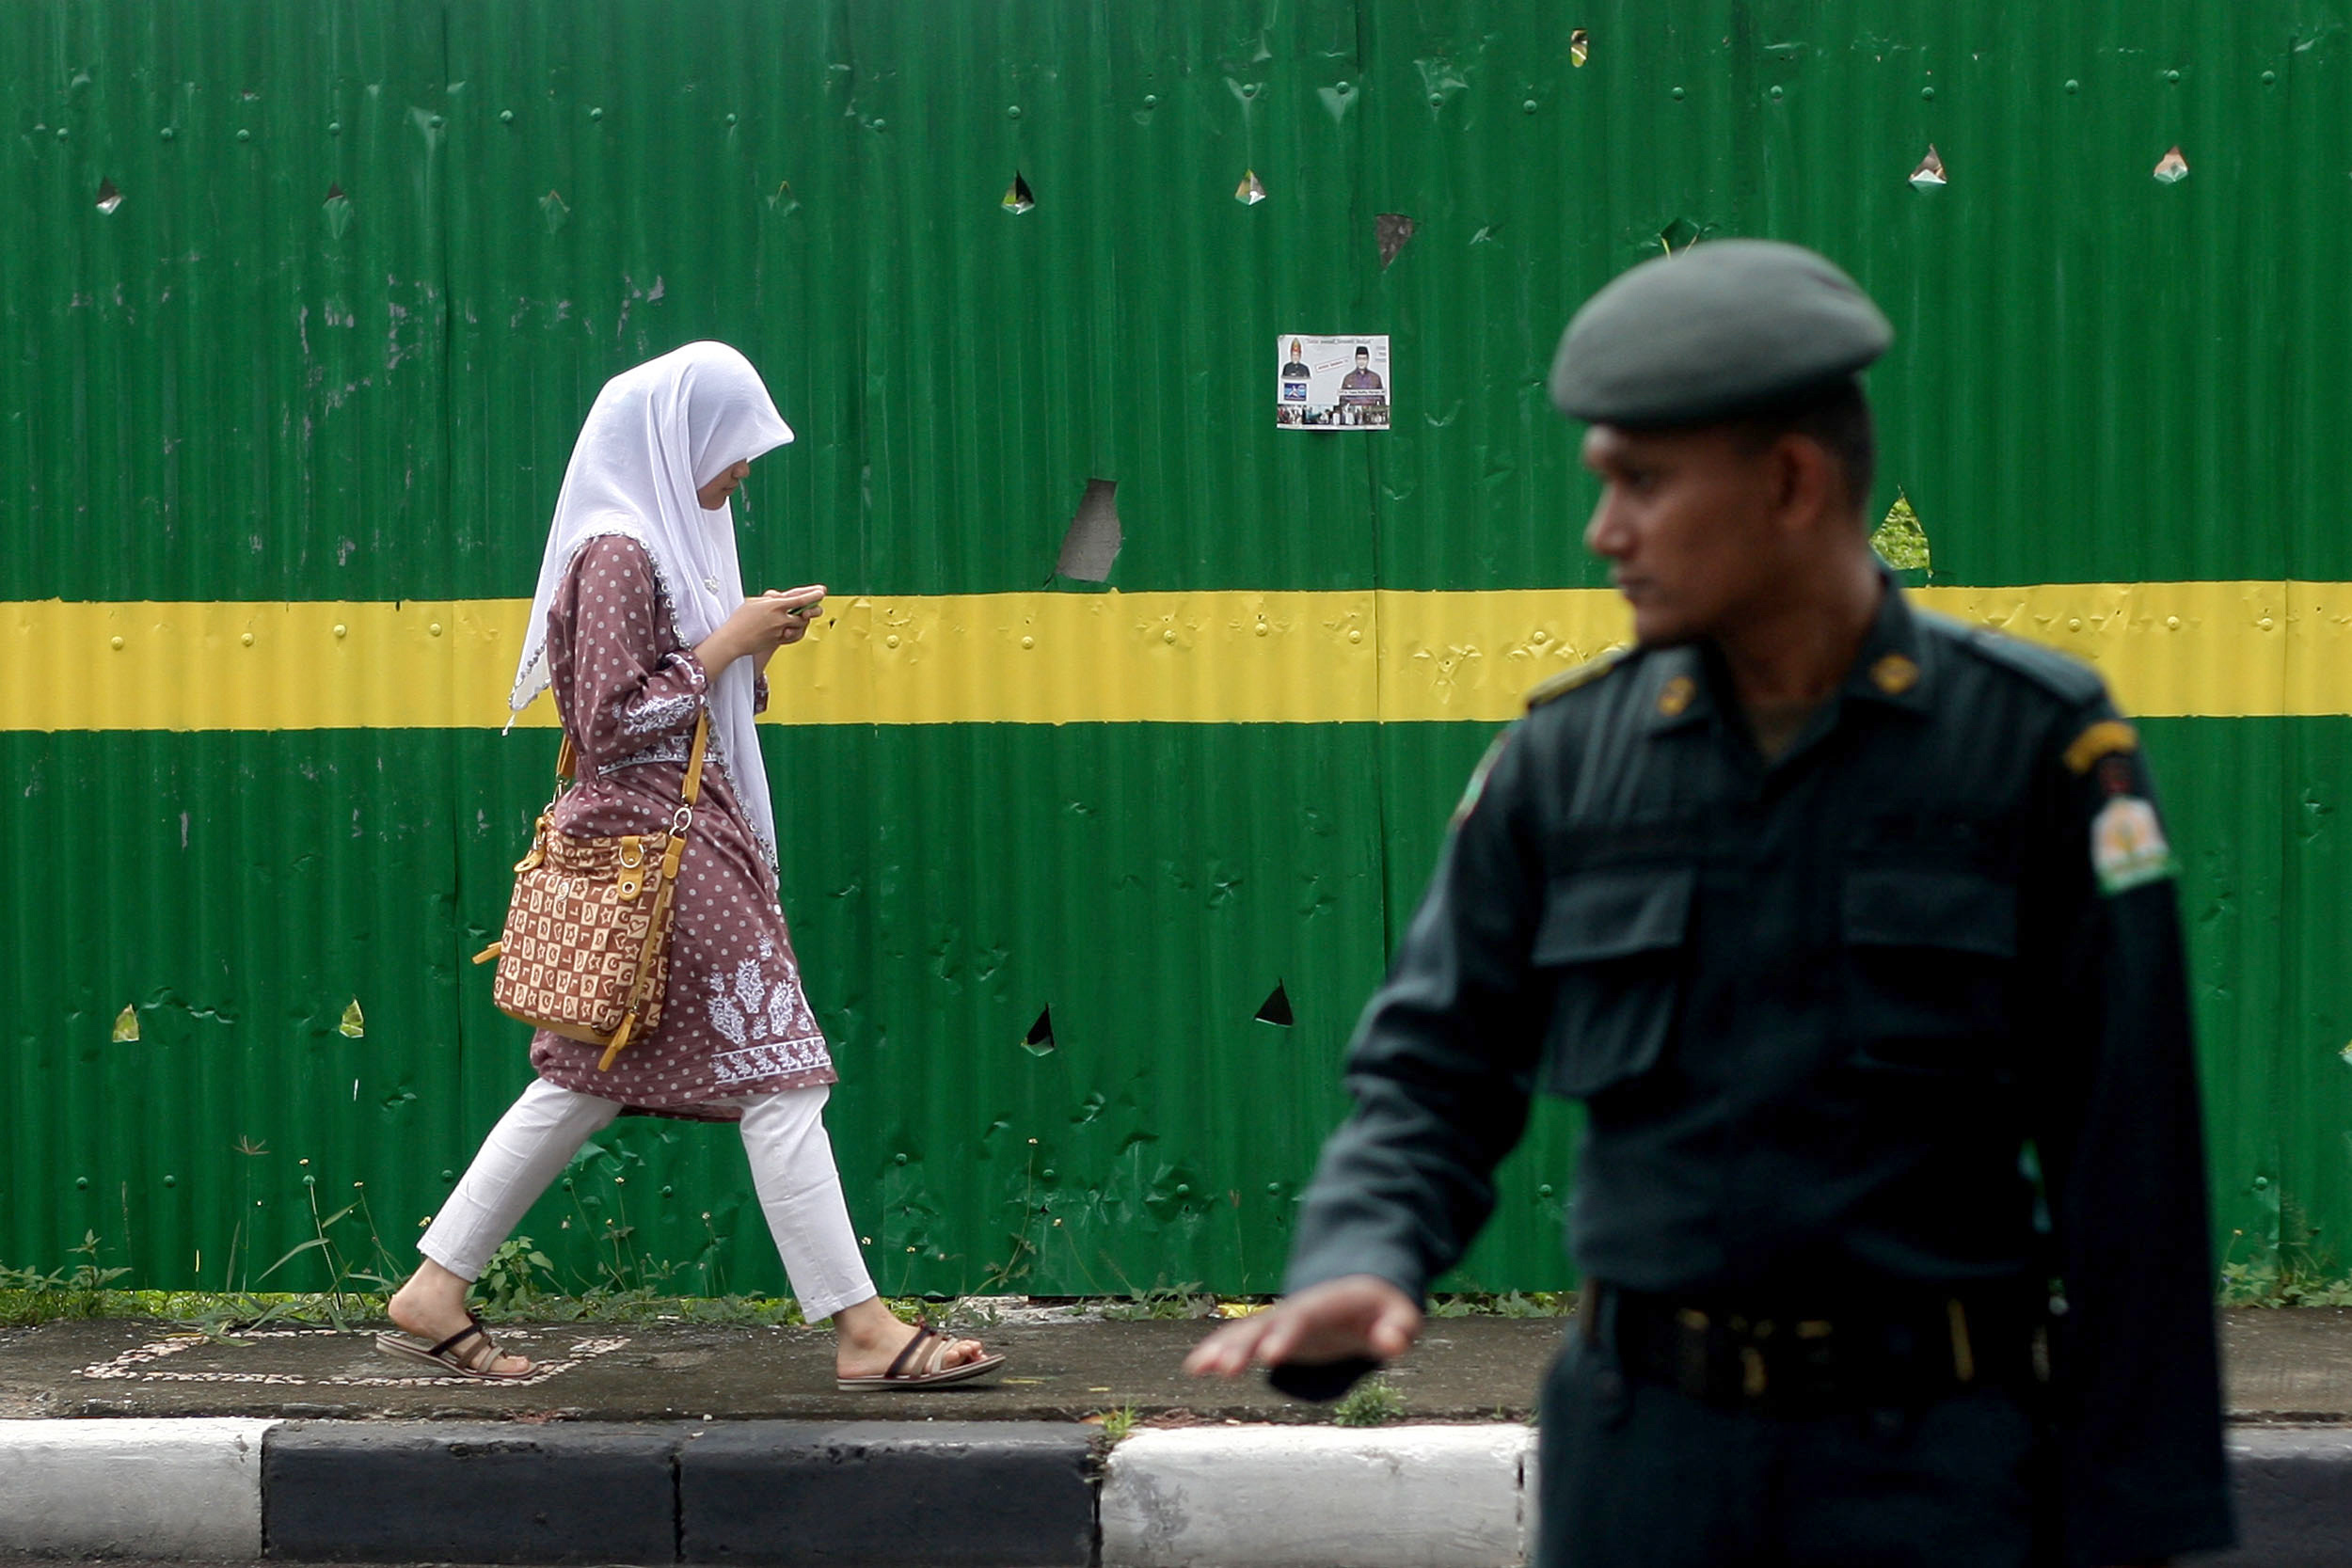 An Acehnese Shari‘a police officer mans a checkpoint as a Muslim woman walks past in Banda Aceh, Aceh province, Indonesia, in October 2013 (Heri Juanda—AP)